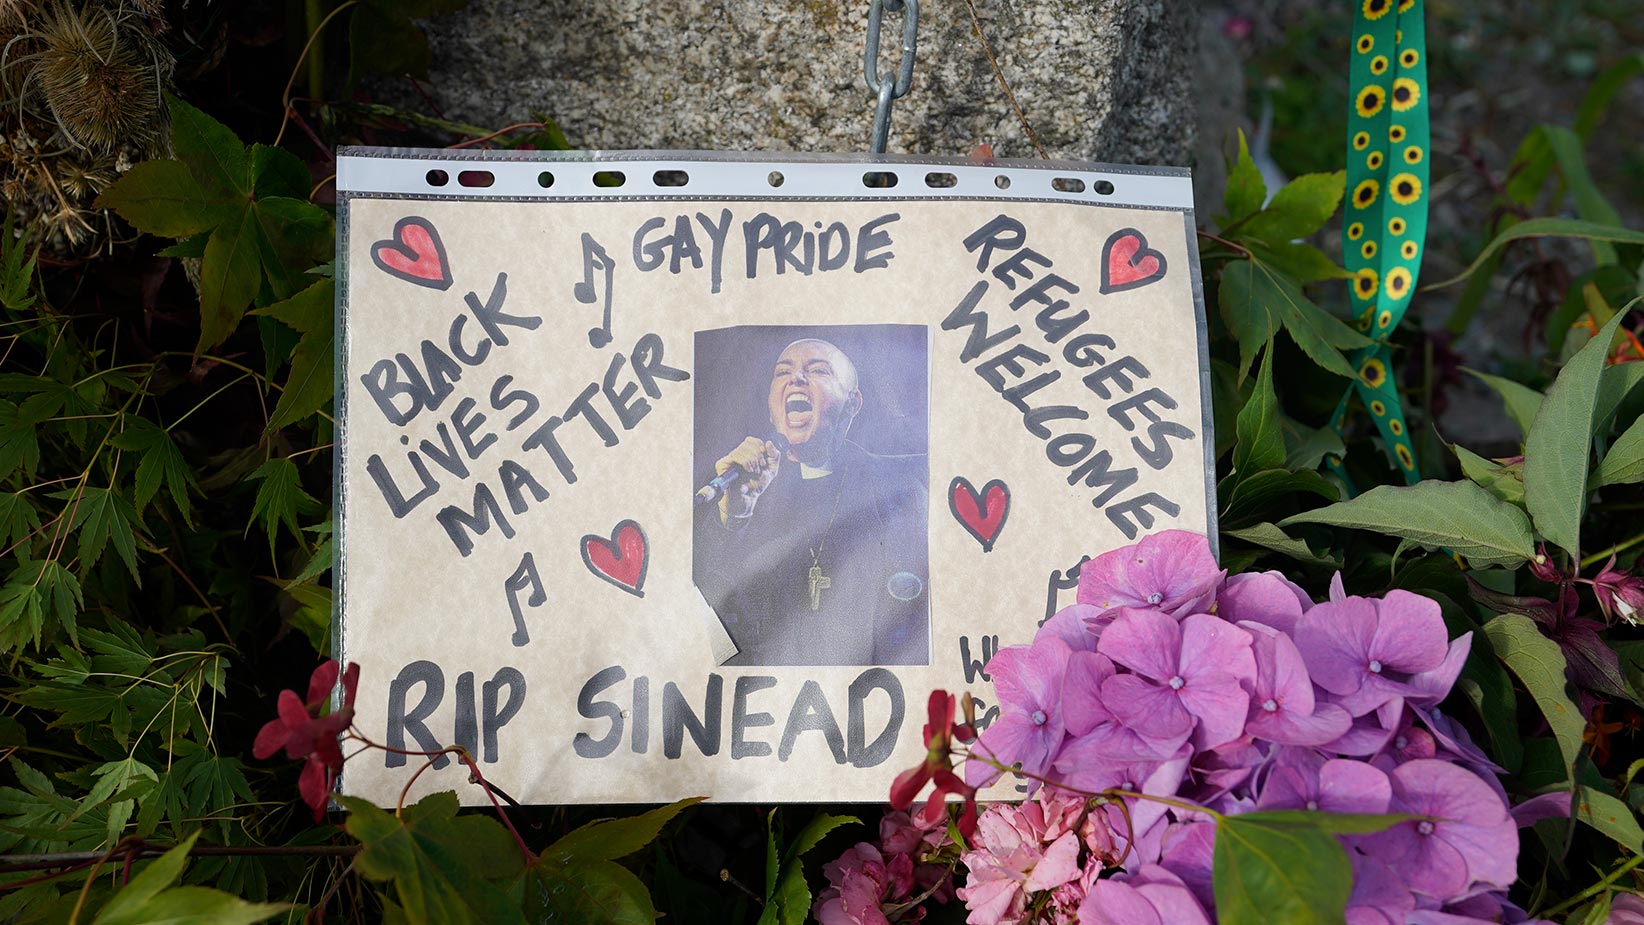 Funeral held for Nothing Compares 2 U singer Sinead O'Connor | This Morning